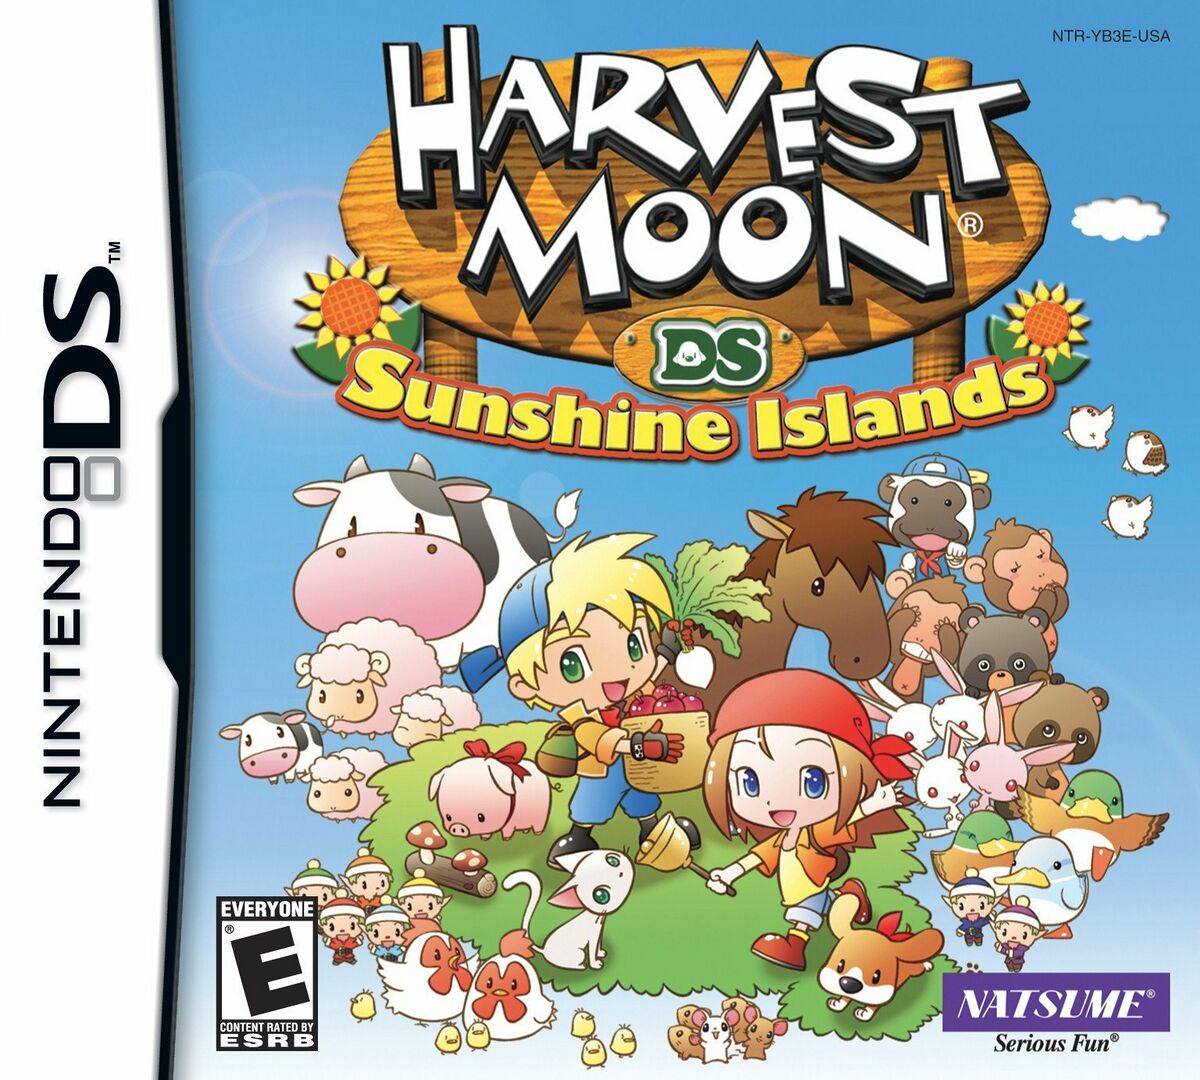 harvest-moon-ds-sunshine-islands-strategywiki-strategy-guide-and-game-reference-wiki